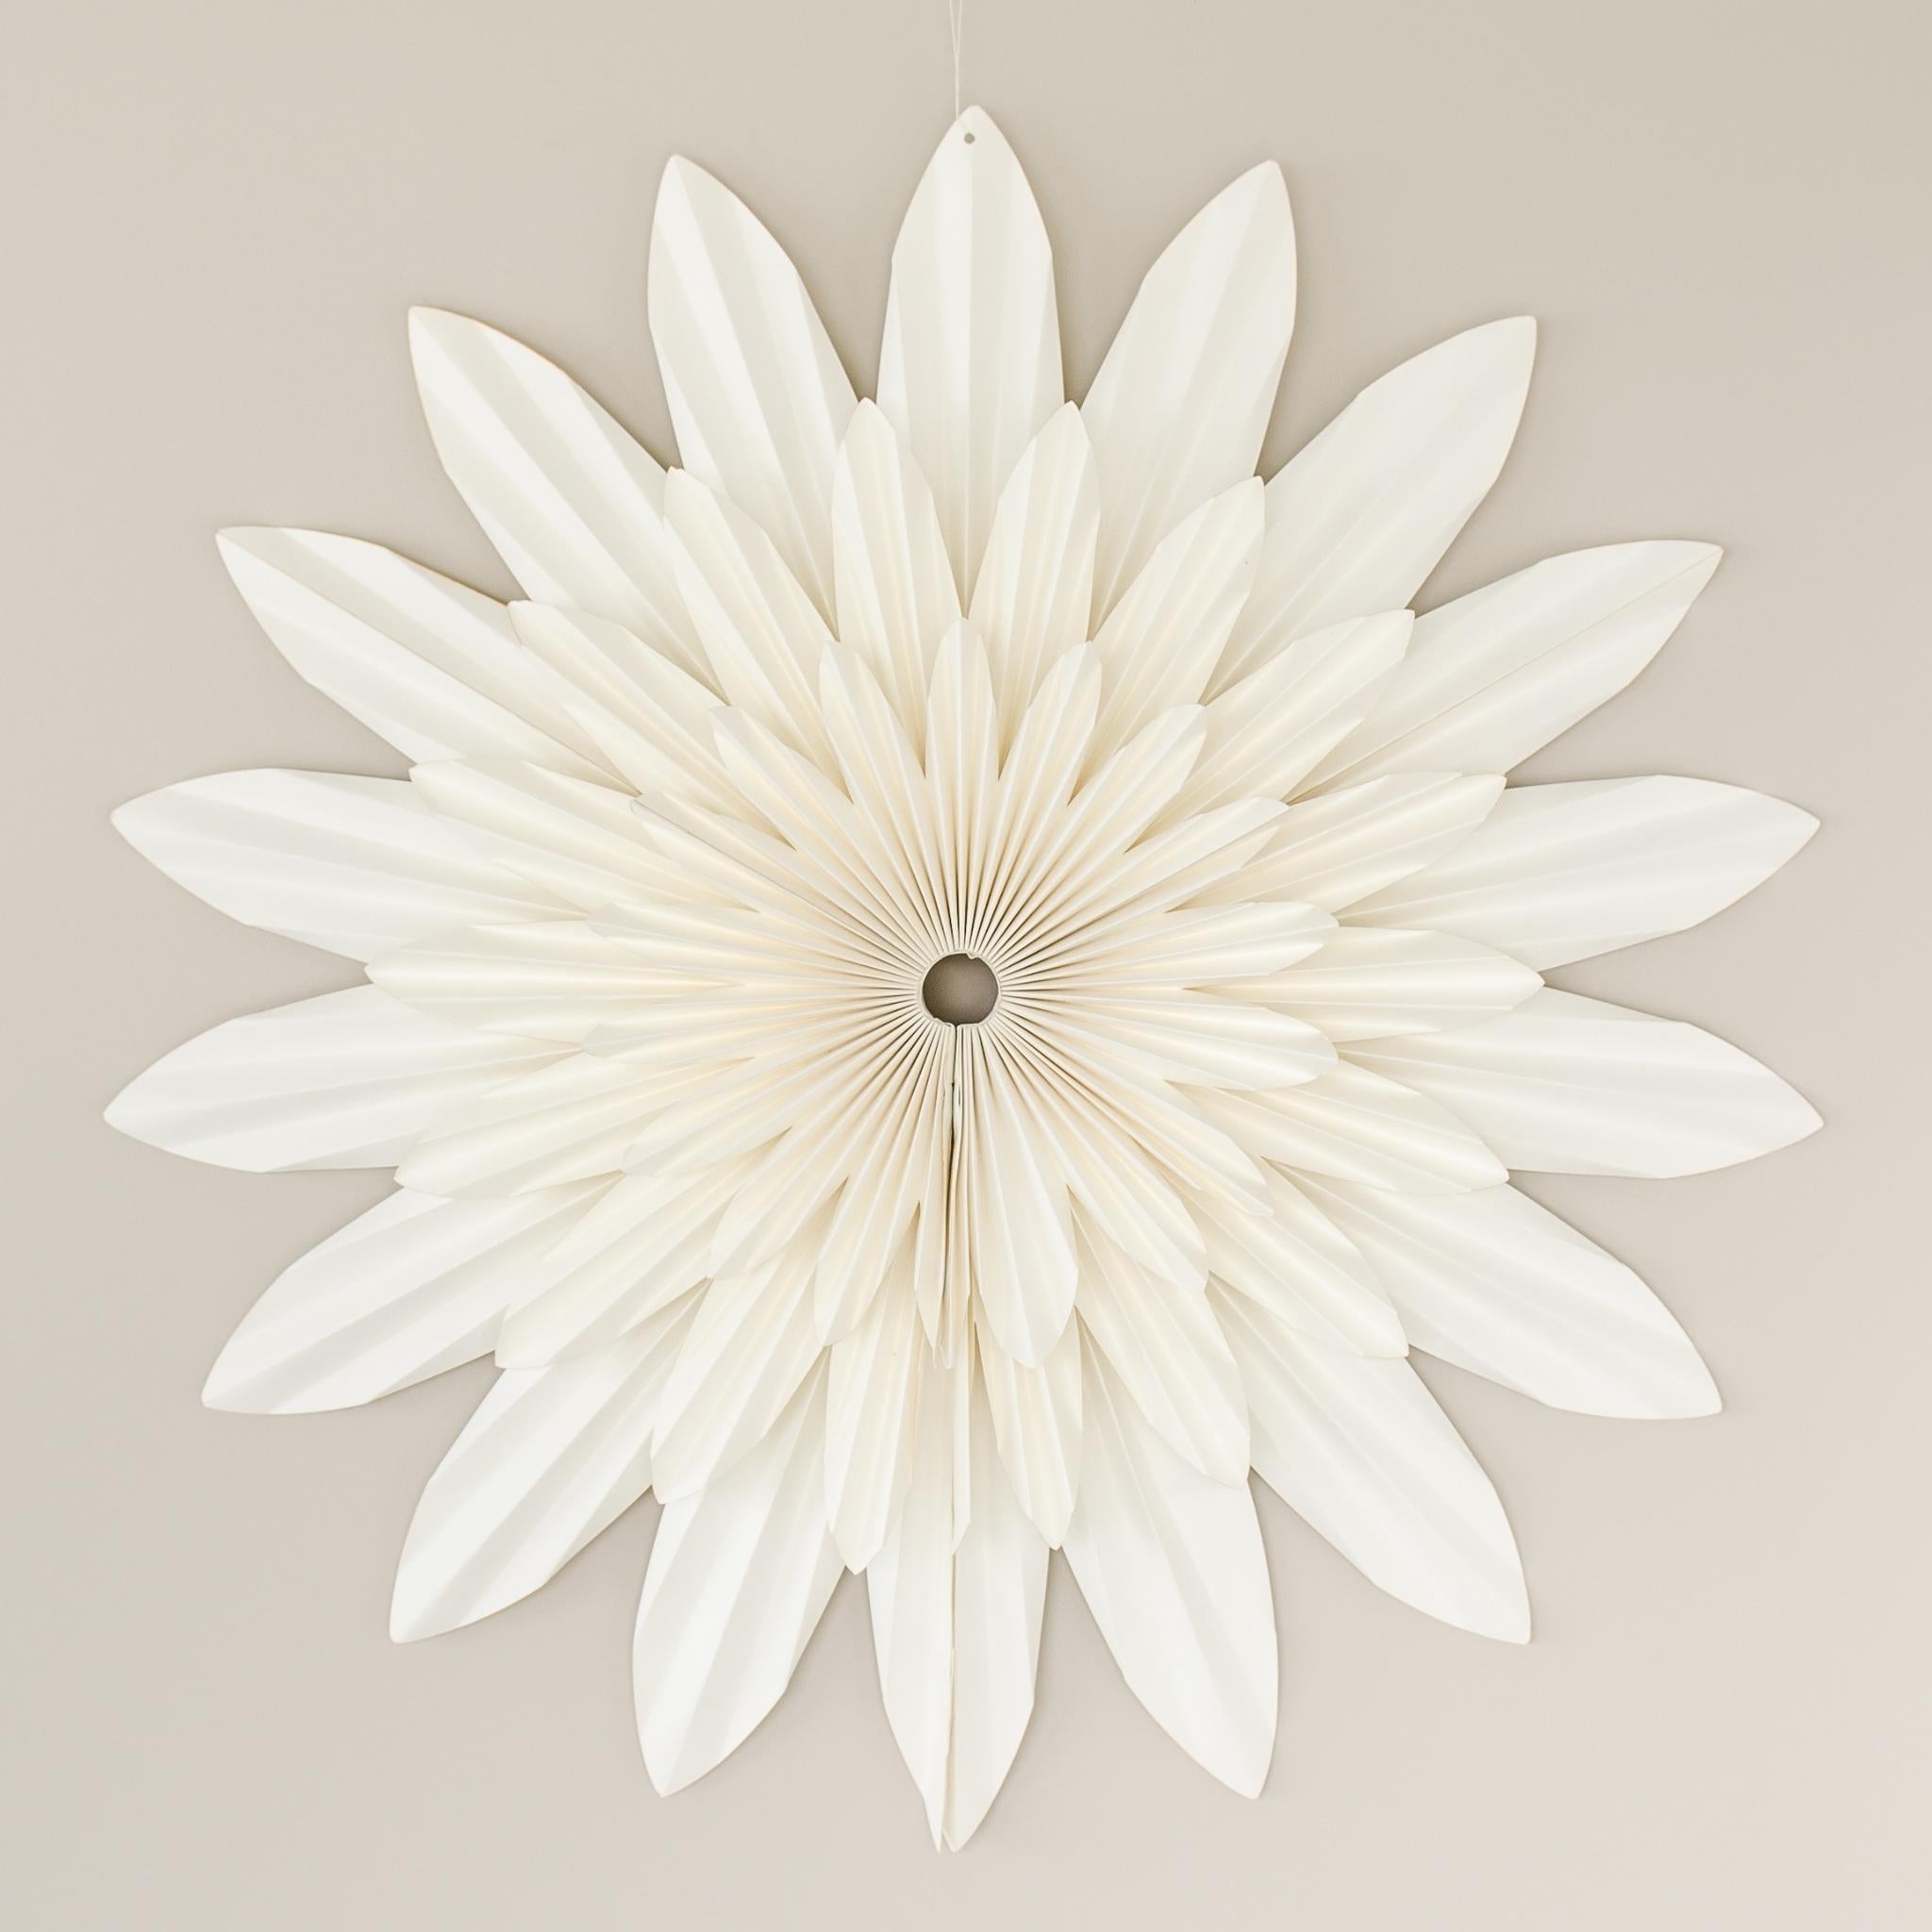 70 cm Off-white paper flower wall hanging, hanging on a beige wall 